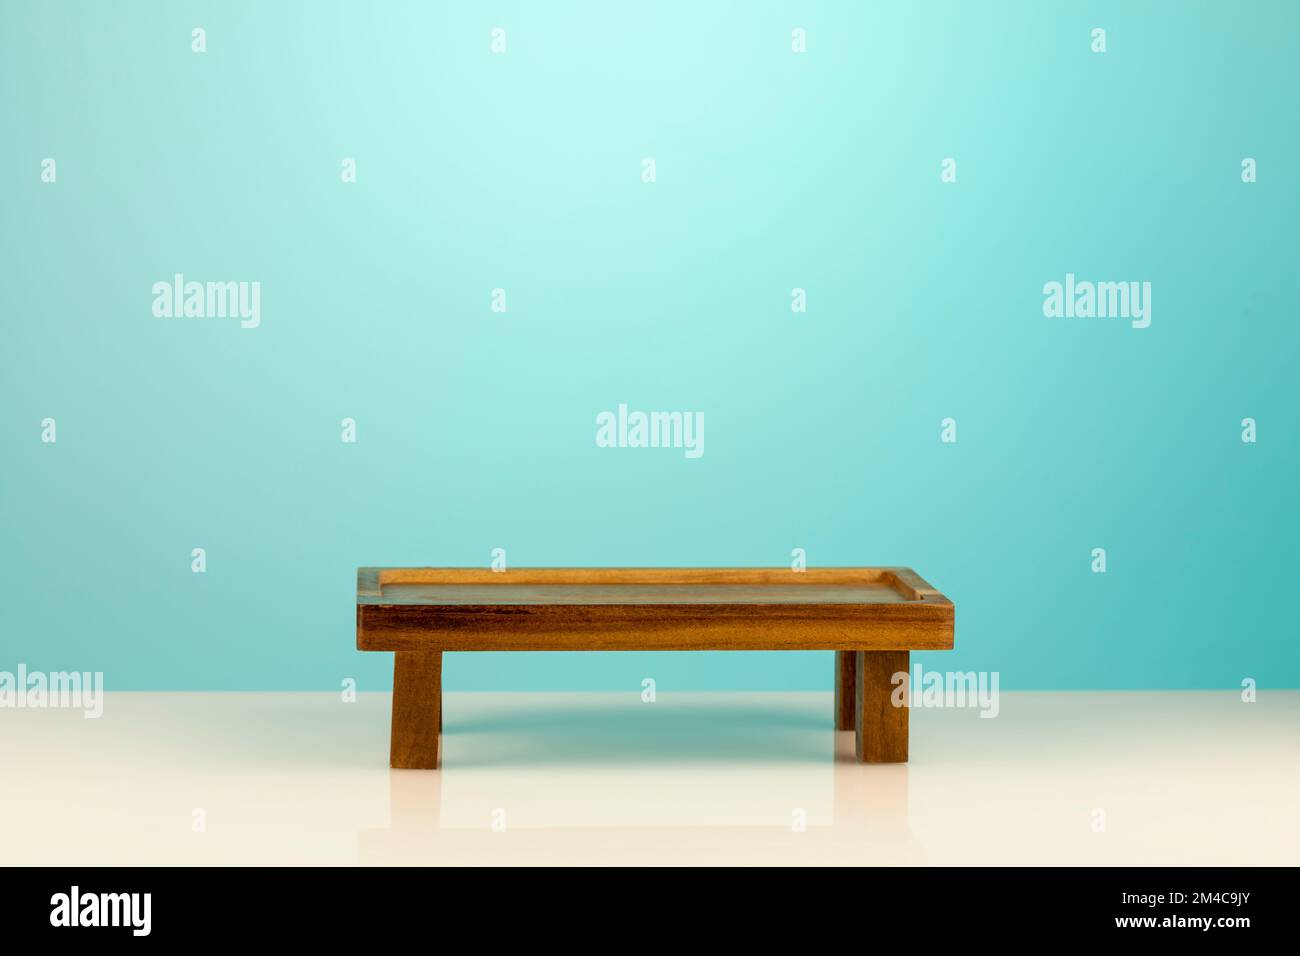 Wooden empty podium for food, products or cosmetics against blue gradient background. Small decorative table for product, display presentation or mont Stock Photo